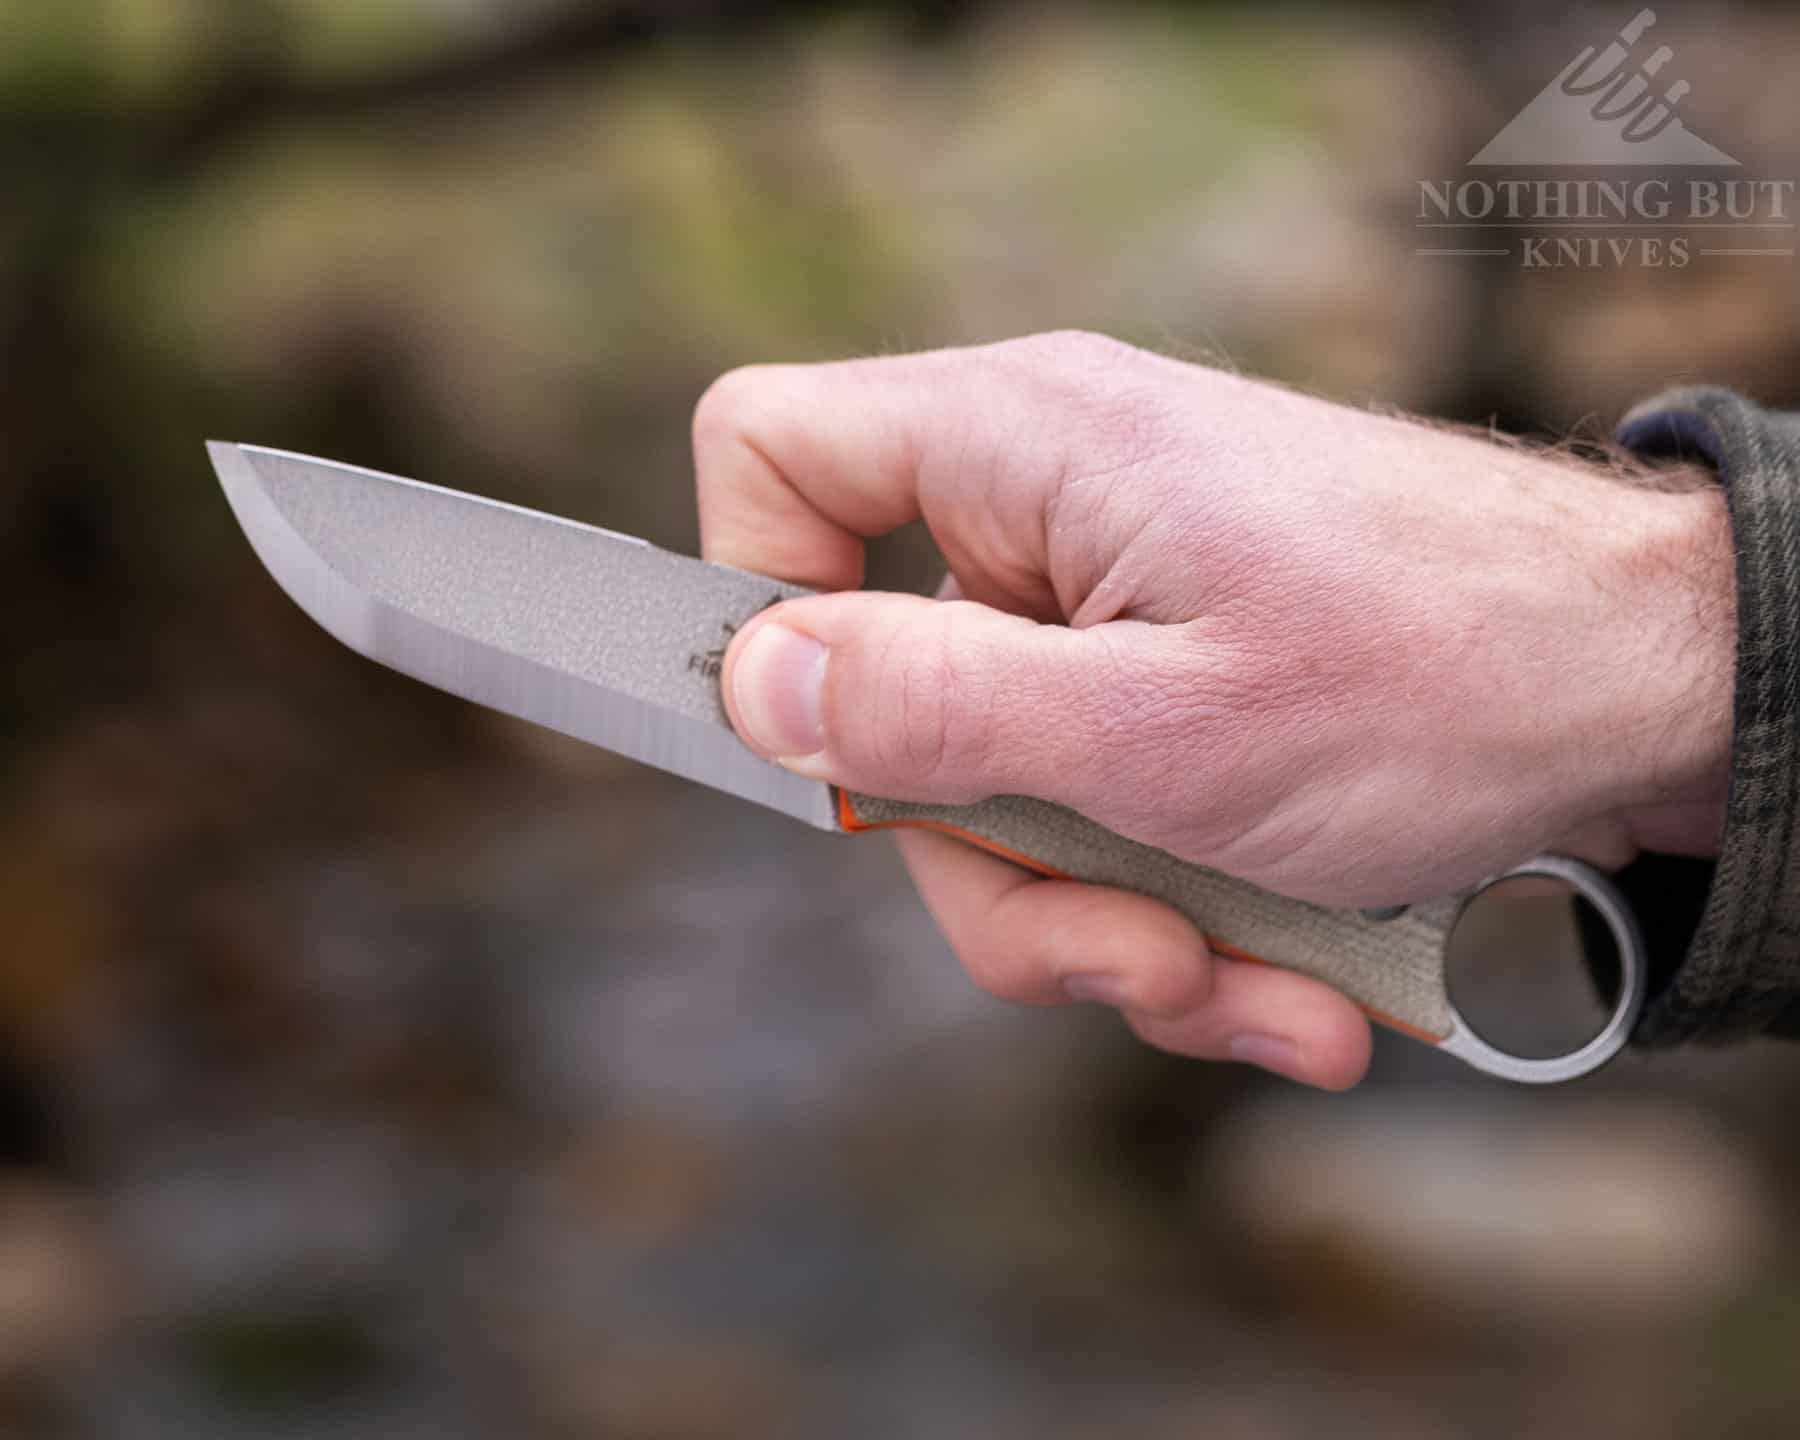 Like many Puukko designs, the Firecraft FC-PKO is easy to hold in a variety of positions. These are solid knives for delicate work and more intensive kindling prep, too.